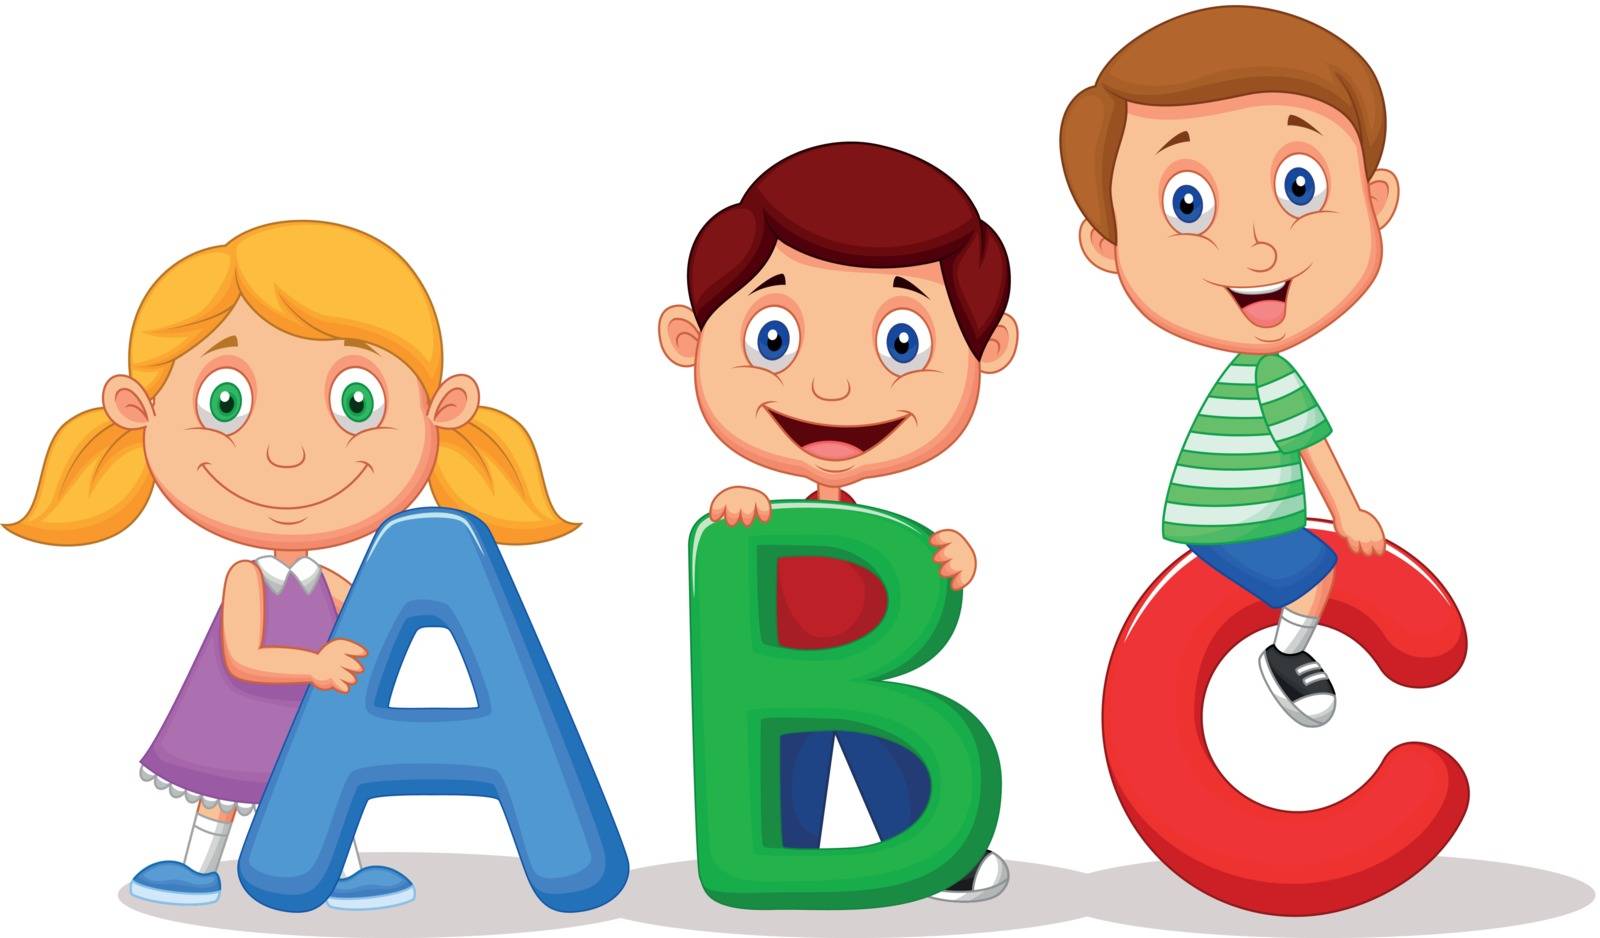 Children with ABC by tigatelu